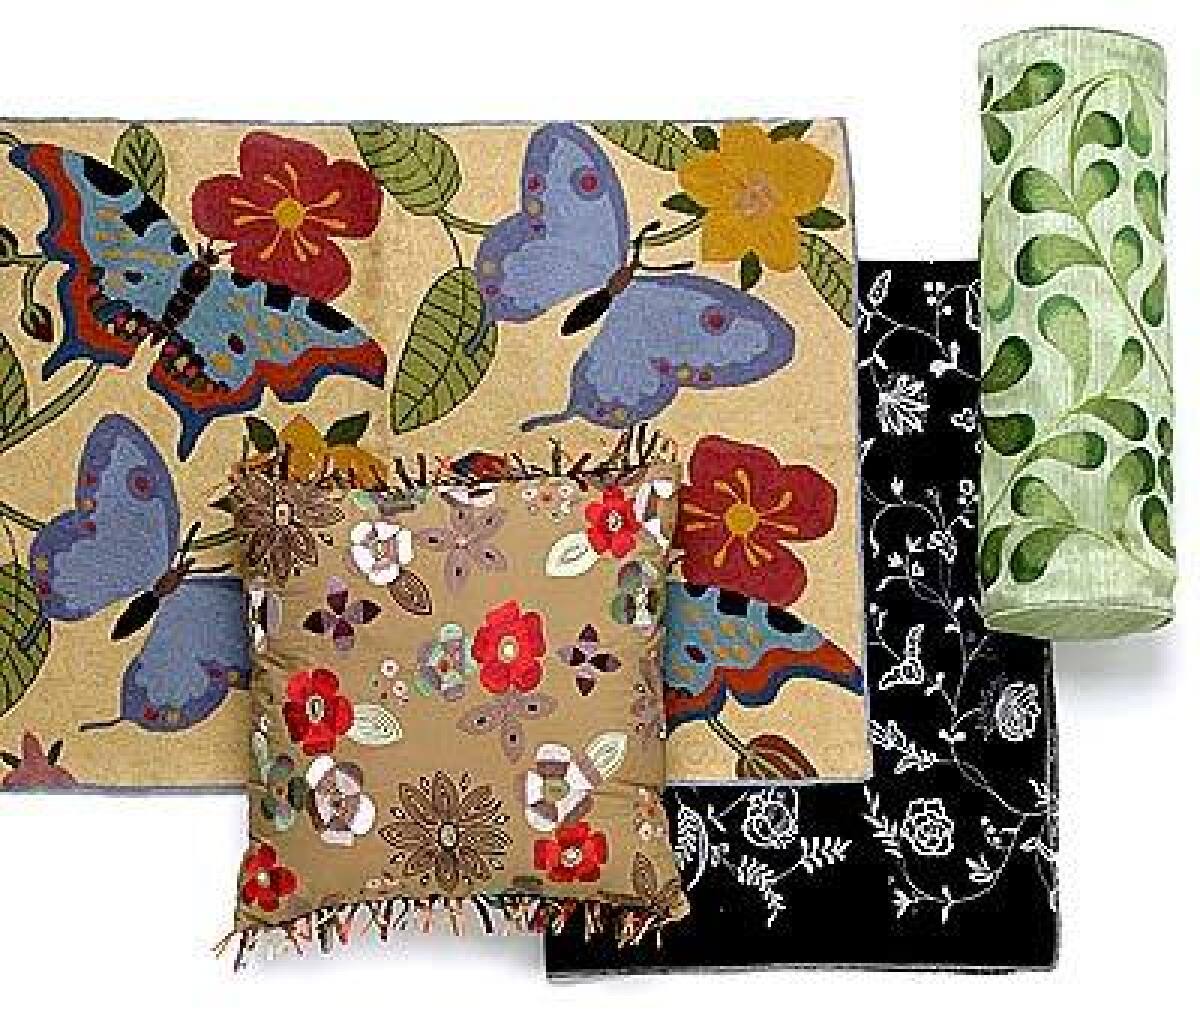 Embroidery becomes embraceable when done with bold colors, graphic flowers and a variety of fabrics and threads. Fully stitched 2- by 3-foot butterfly rug, $58, at Anthropologie. Beaded floral pillow with ribbon fringe, $30, at Pier 1. Traditional crewel in nontraditional black and white upholstery fabric, $84 per yard at Cottonwood Living, Pasadena, (626) 584-1273. Leaf-embroidered hemp neck roll, $59 at www.horchow.com, (877) 944-9888.